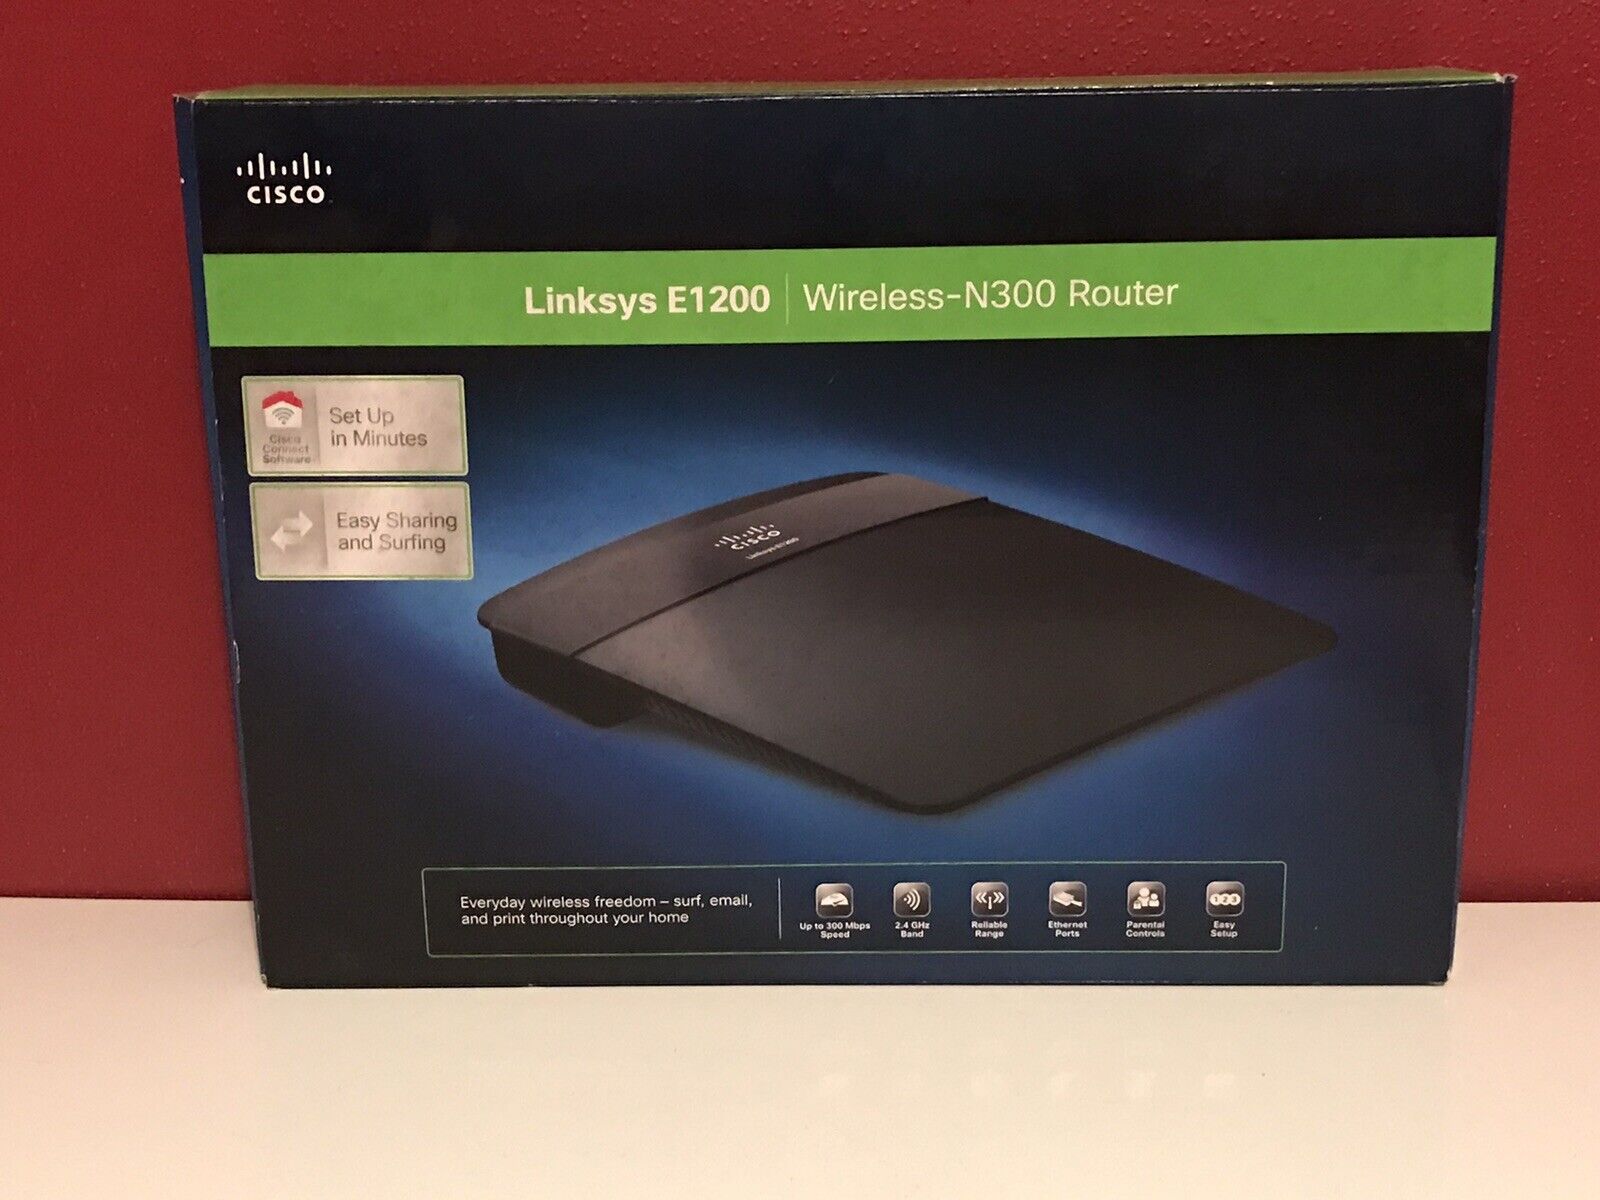 Linksys N300 Wi-Fi Wireless Router with Linksys Connect (E1200)